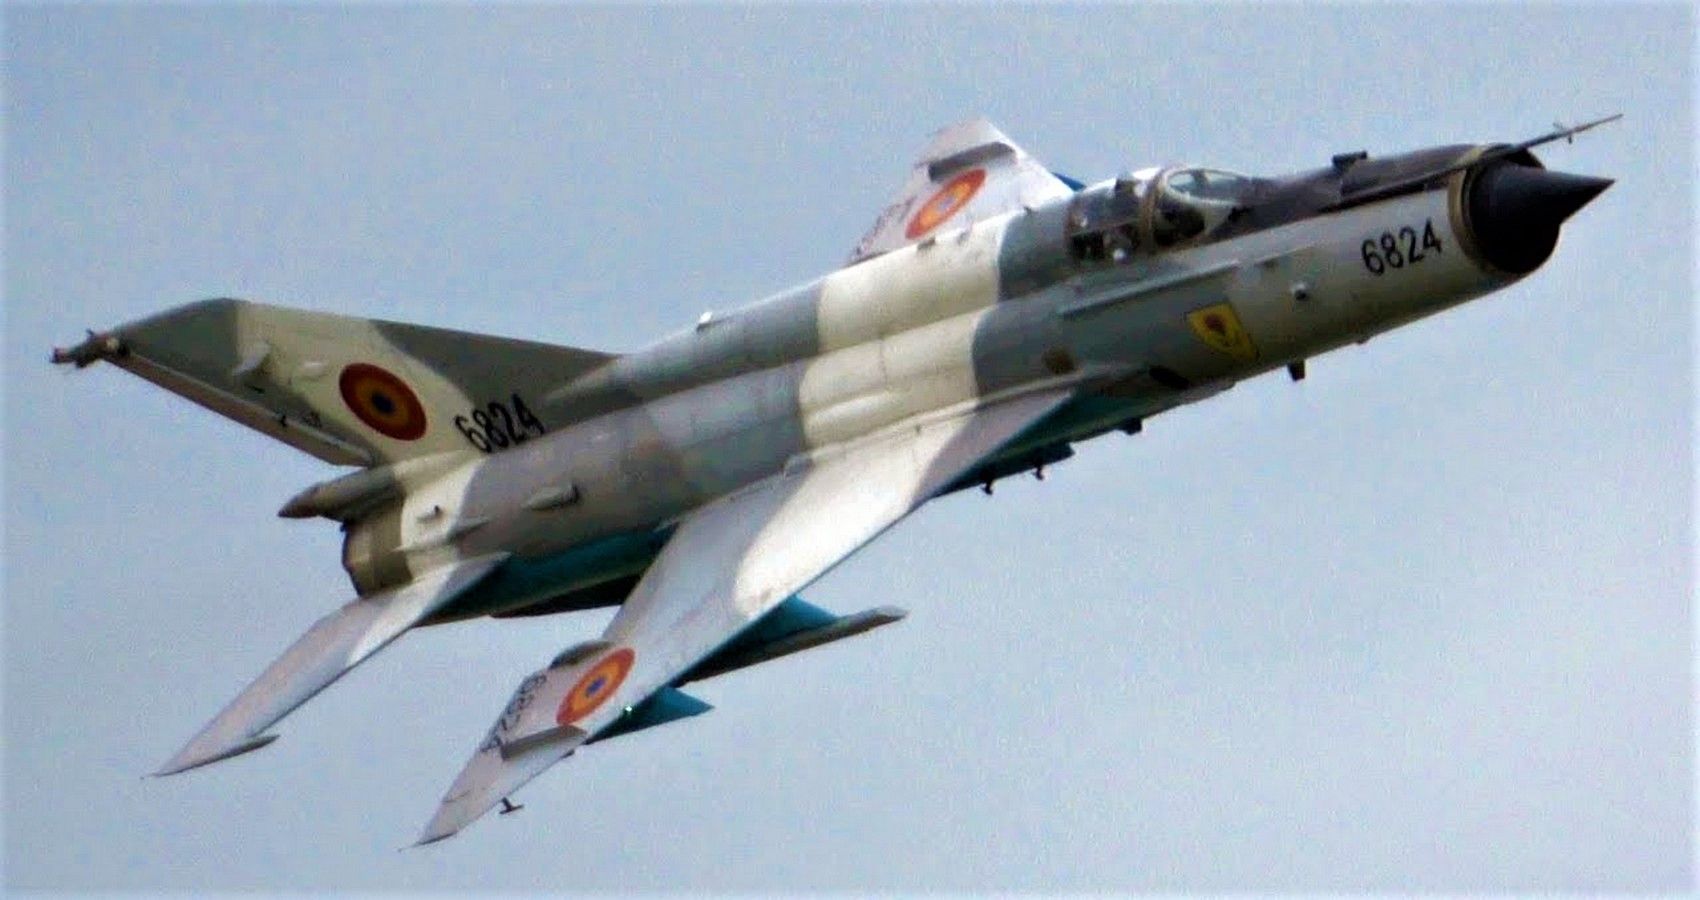 Mig-21 Fishbed - Front